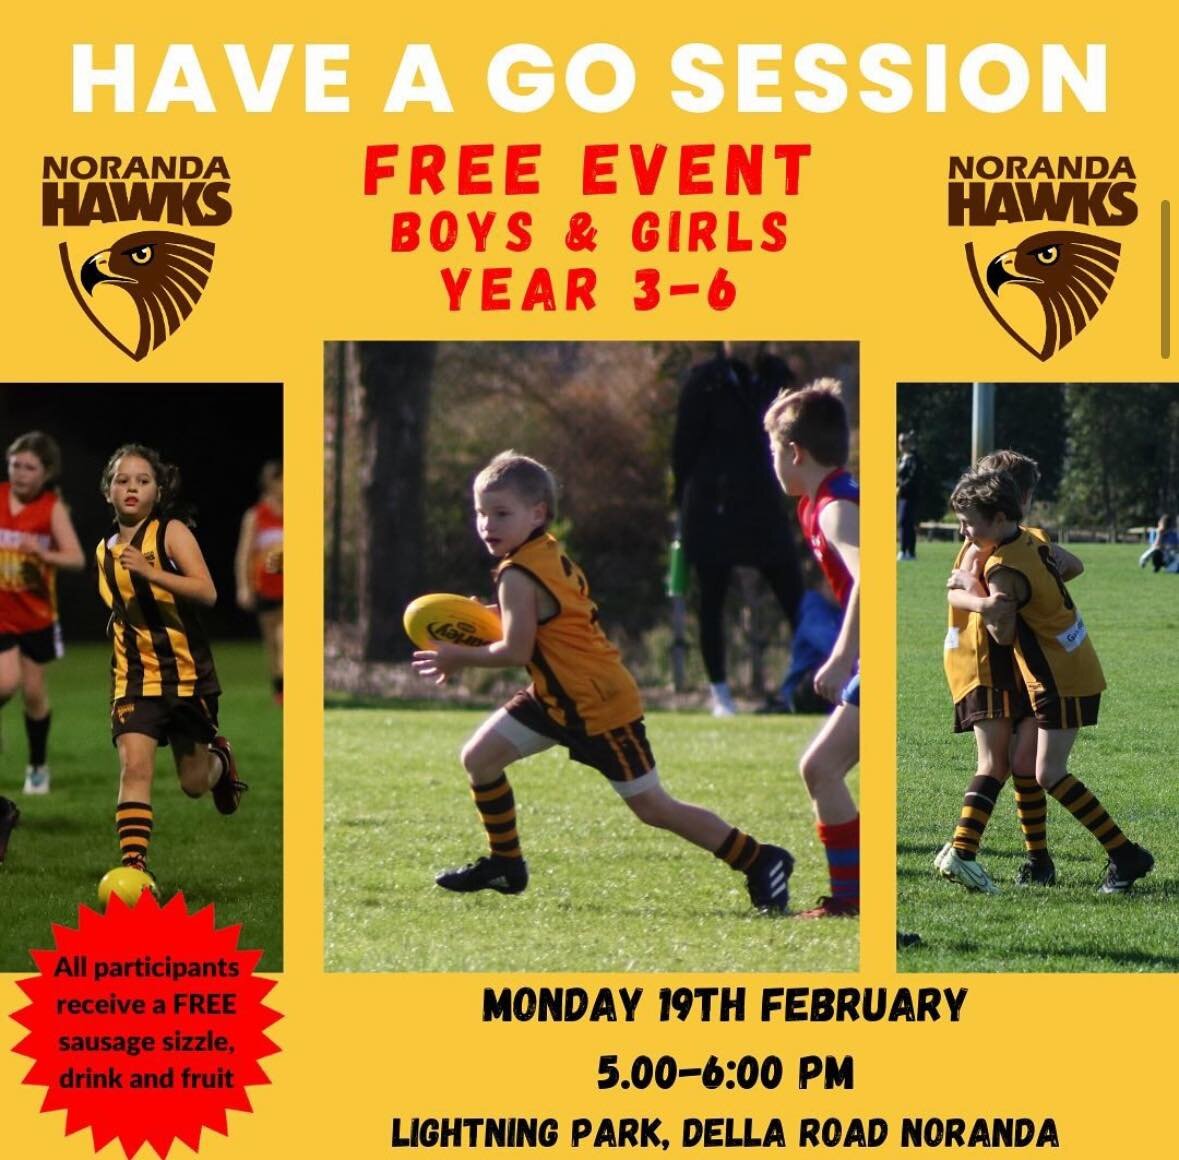 🏉 Want to give footy a go? All Year 3-6 boys &amp; girls are welcome to come down to our FREE &lsquo;HAVE a GO&rsquo; session 🏉

All skill and ability levels welcome. Come down and meet our coaches, check out our facilities and have fun with mates.